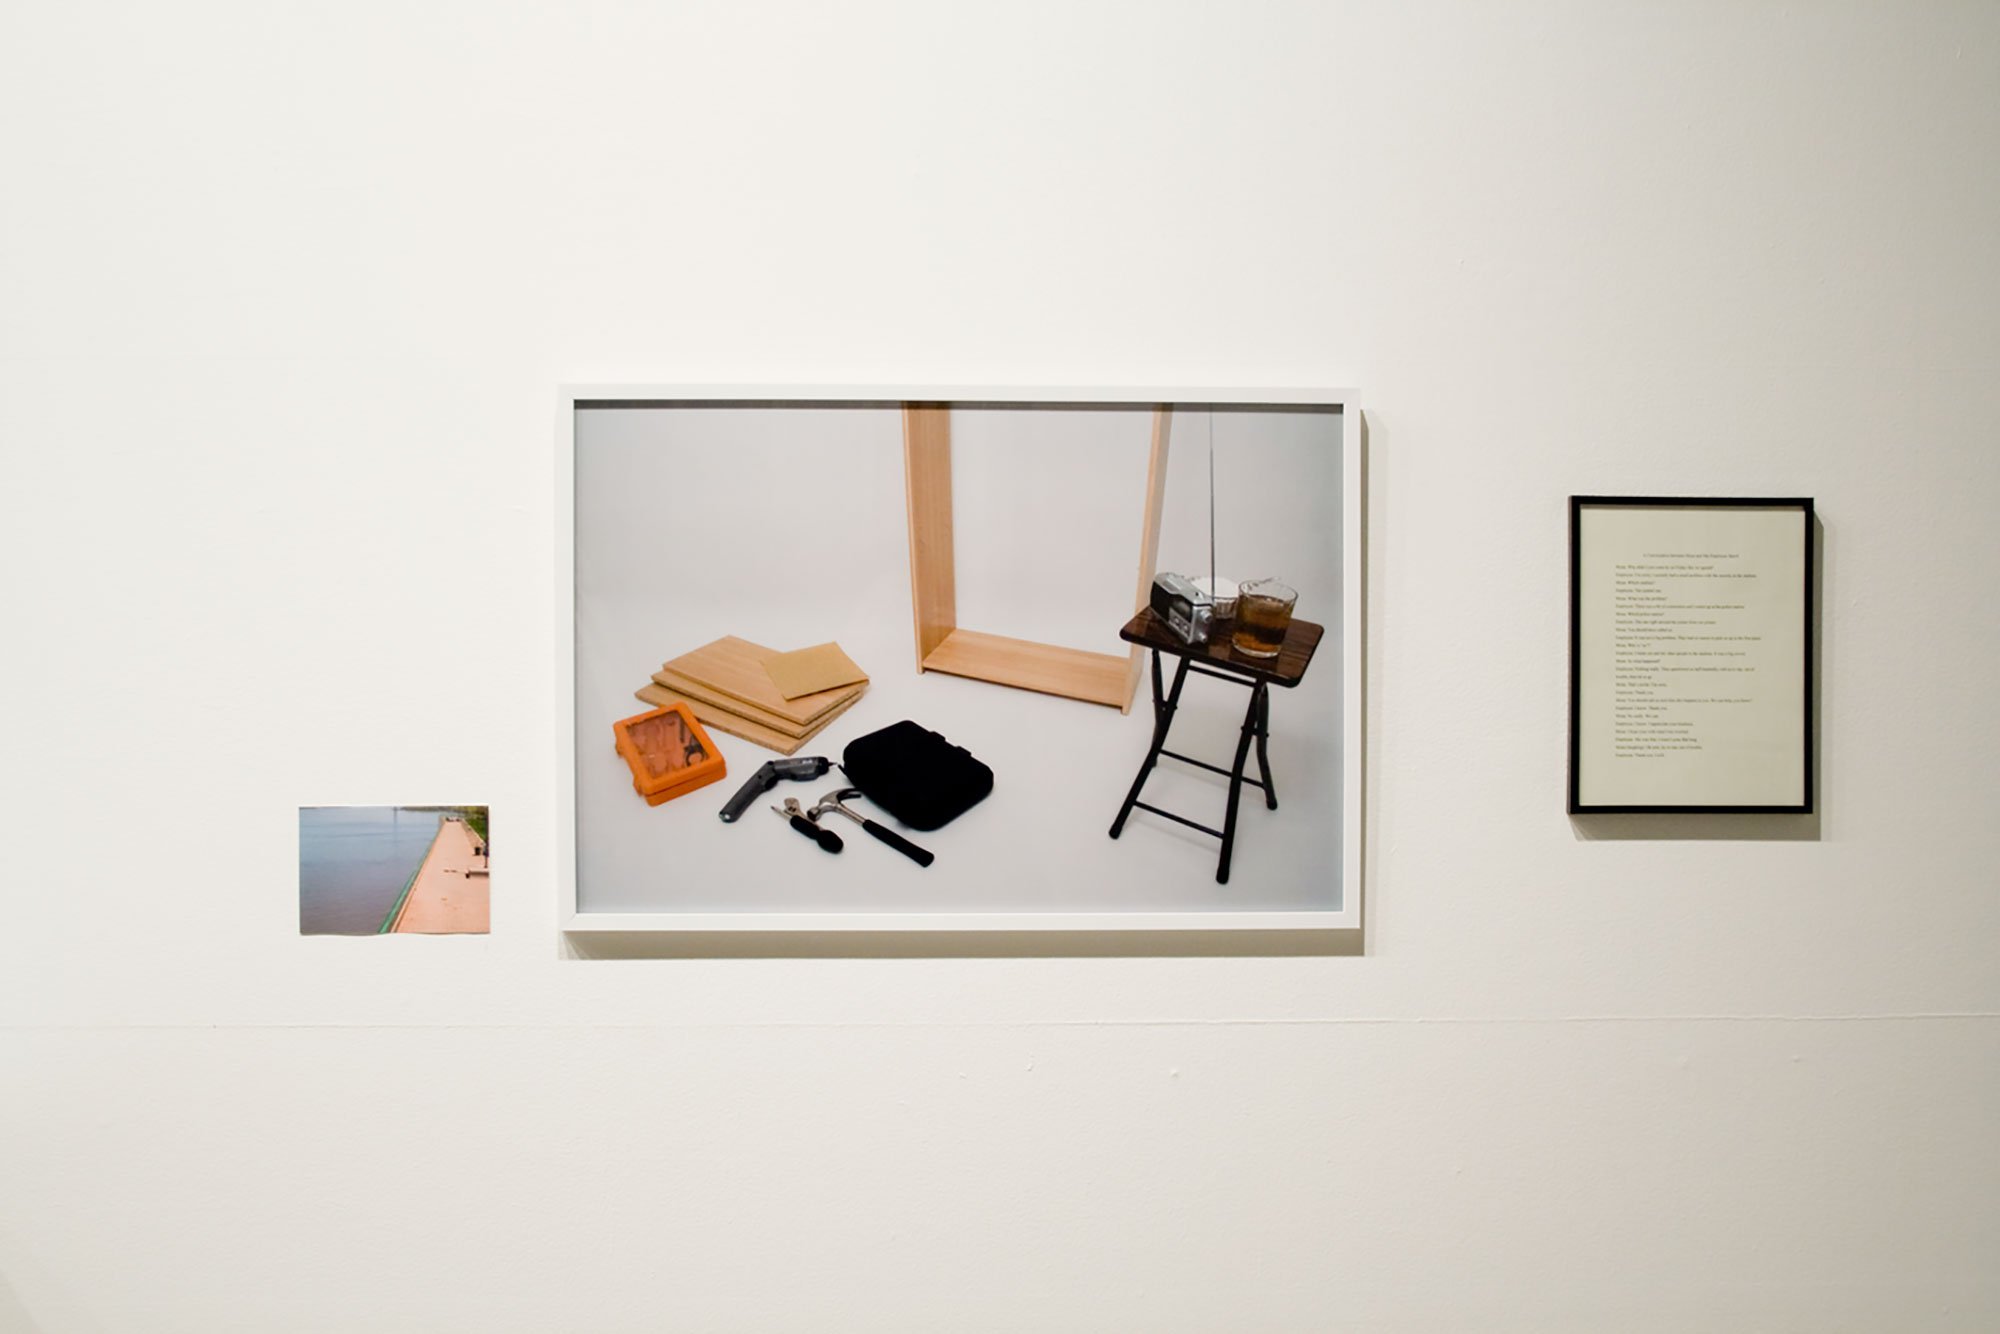 Iman Issa, Triptych #6, photographs, text, dimensions variable, 2009. Installation view, Can Atlay – Iman Issa, Rodeo, Istanbul, 2010